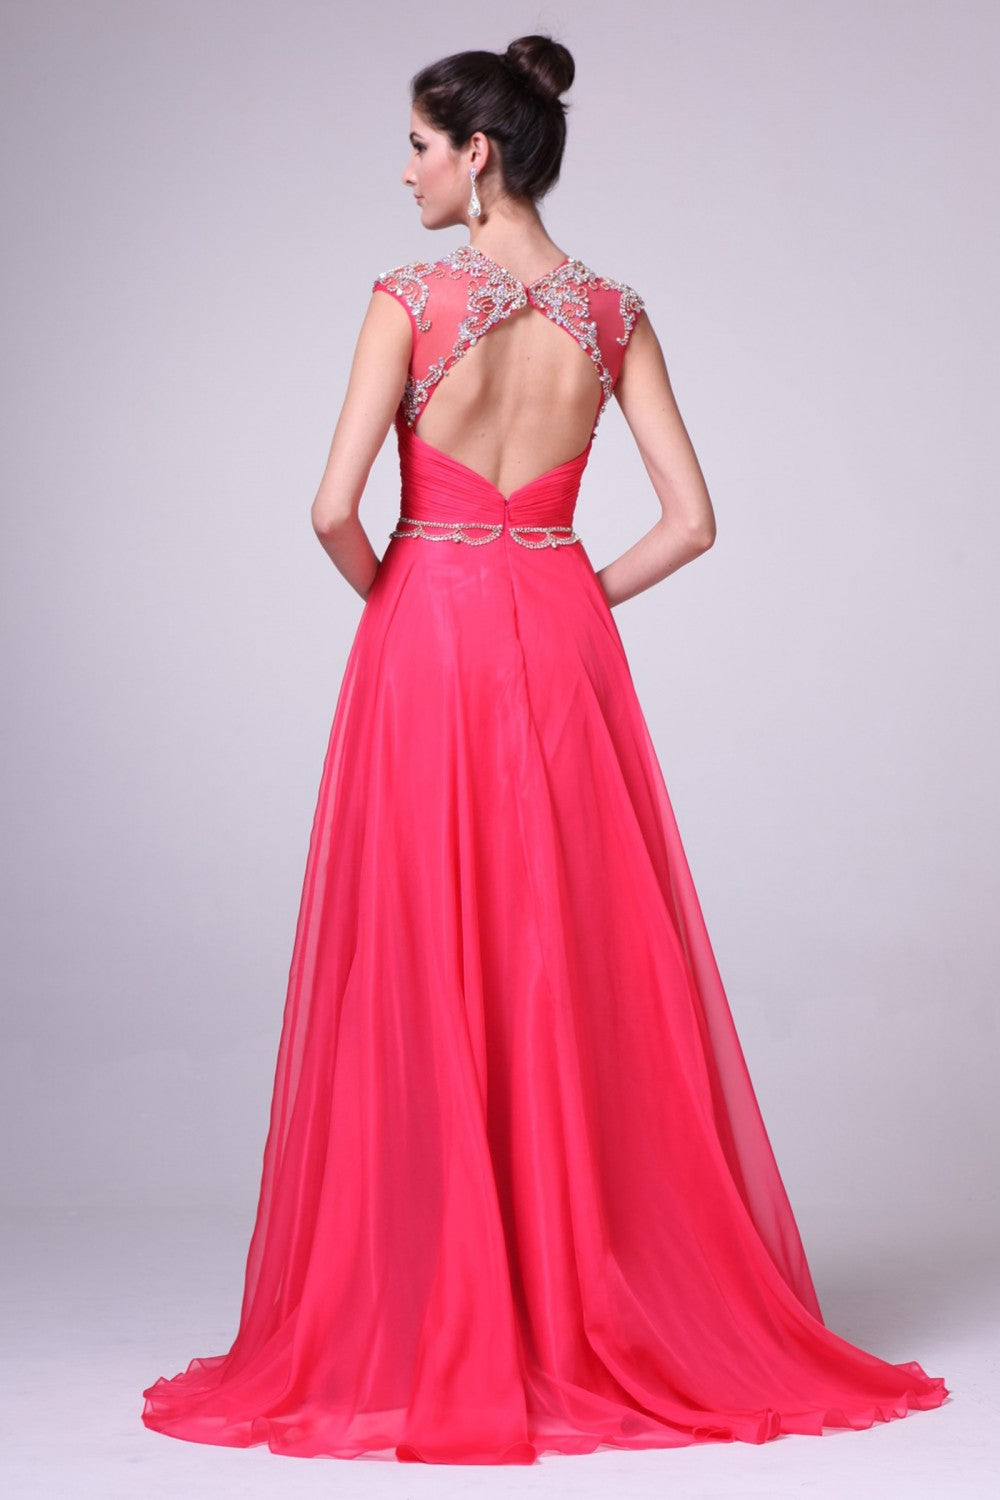 Crystal Embellished Ruched Evening Gown By Cinderella Divine -8785